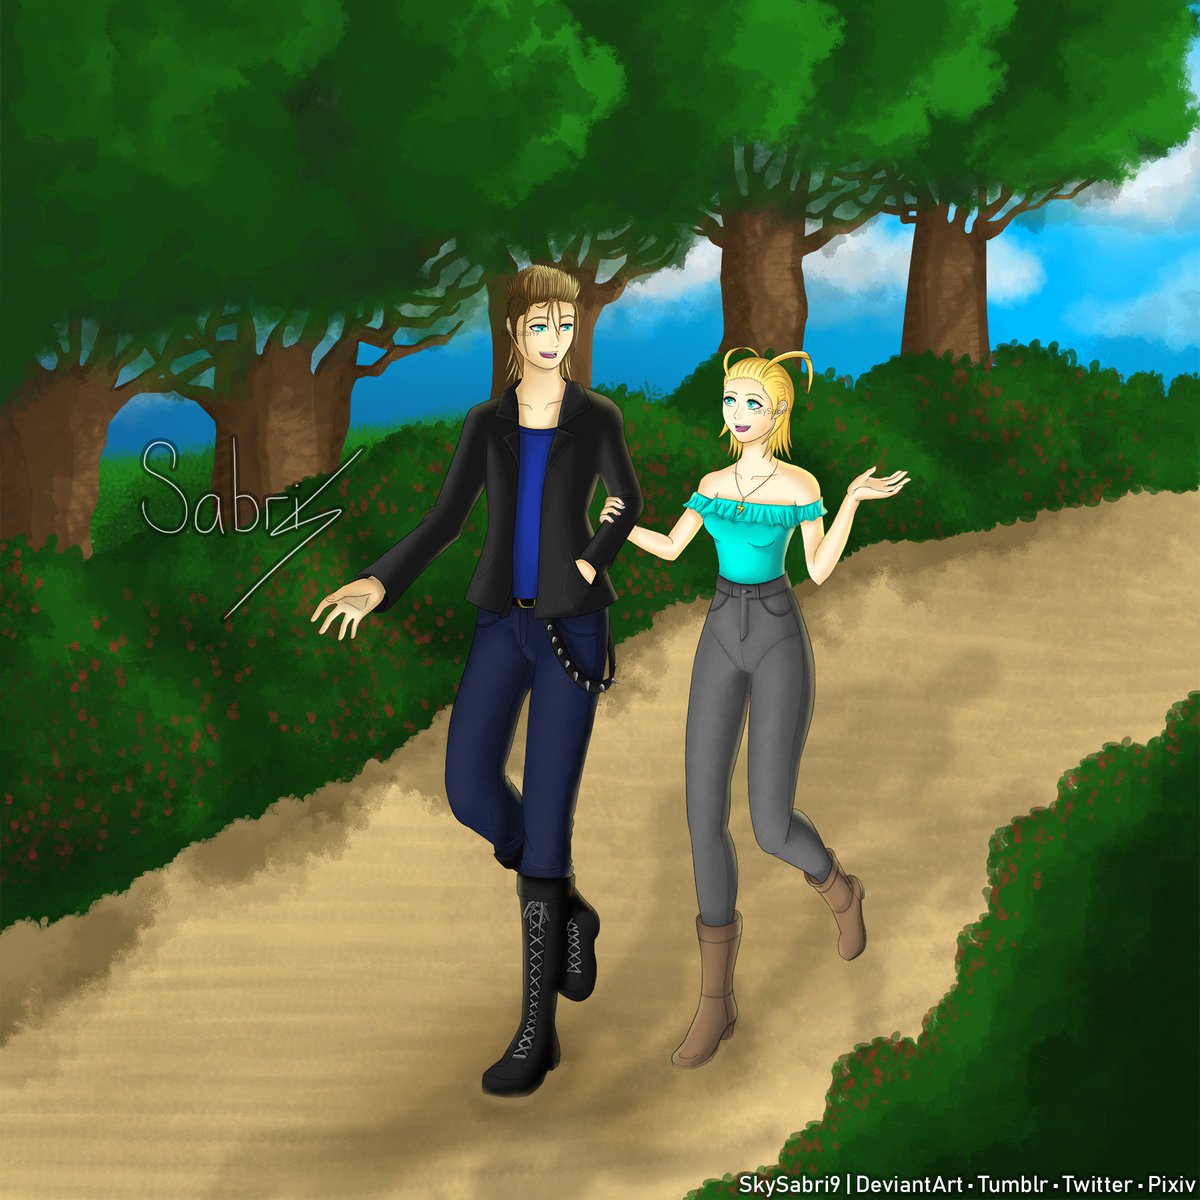 « They went on a date, just a walk through the park. Talking about everything, losing track of time.

Because happiness is found in the simple moments...

Because happiness... is being by your side. »

#Larxene #Demyx #Larxdem #Demlarx #Larmyx #RomanticDate #KingdomHearts